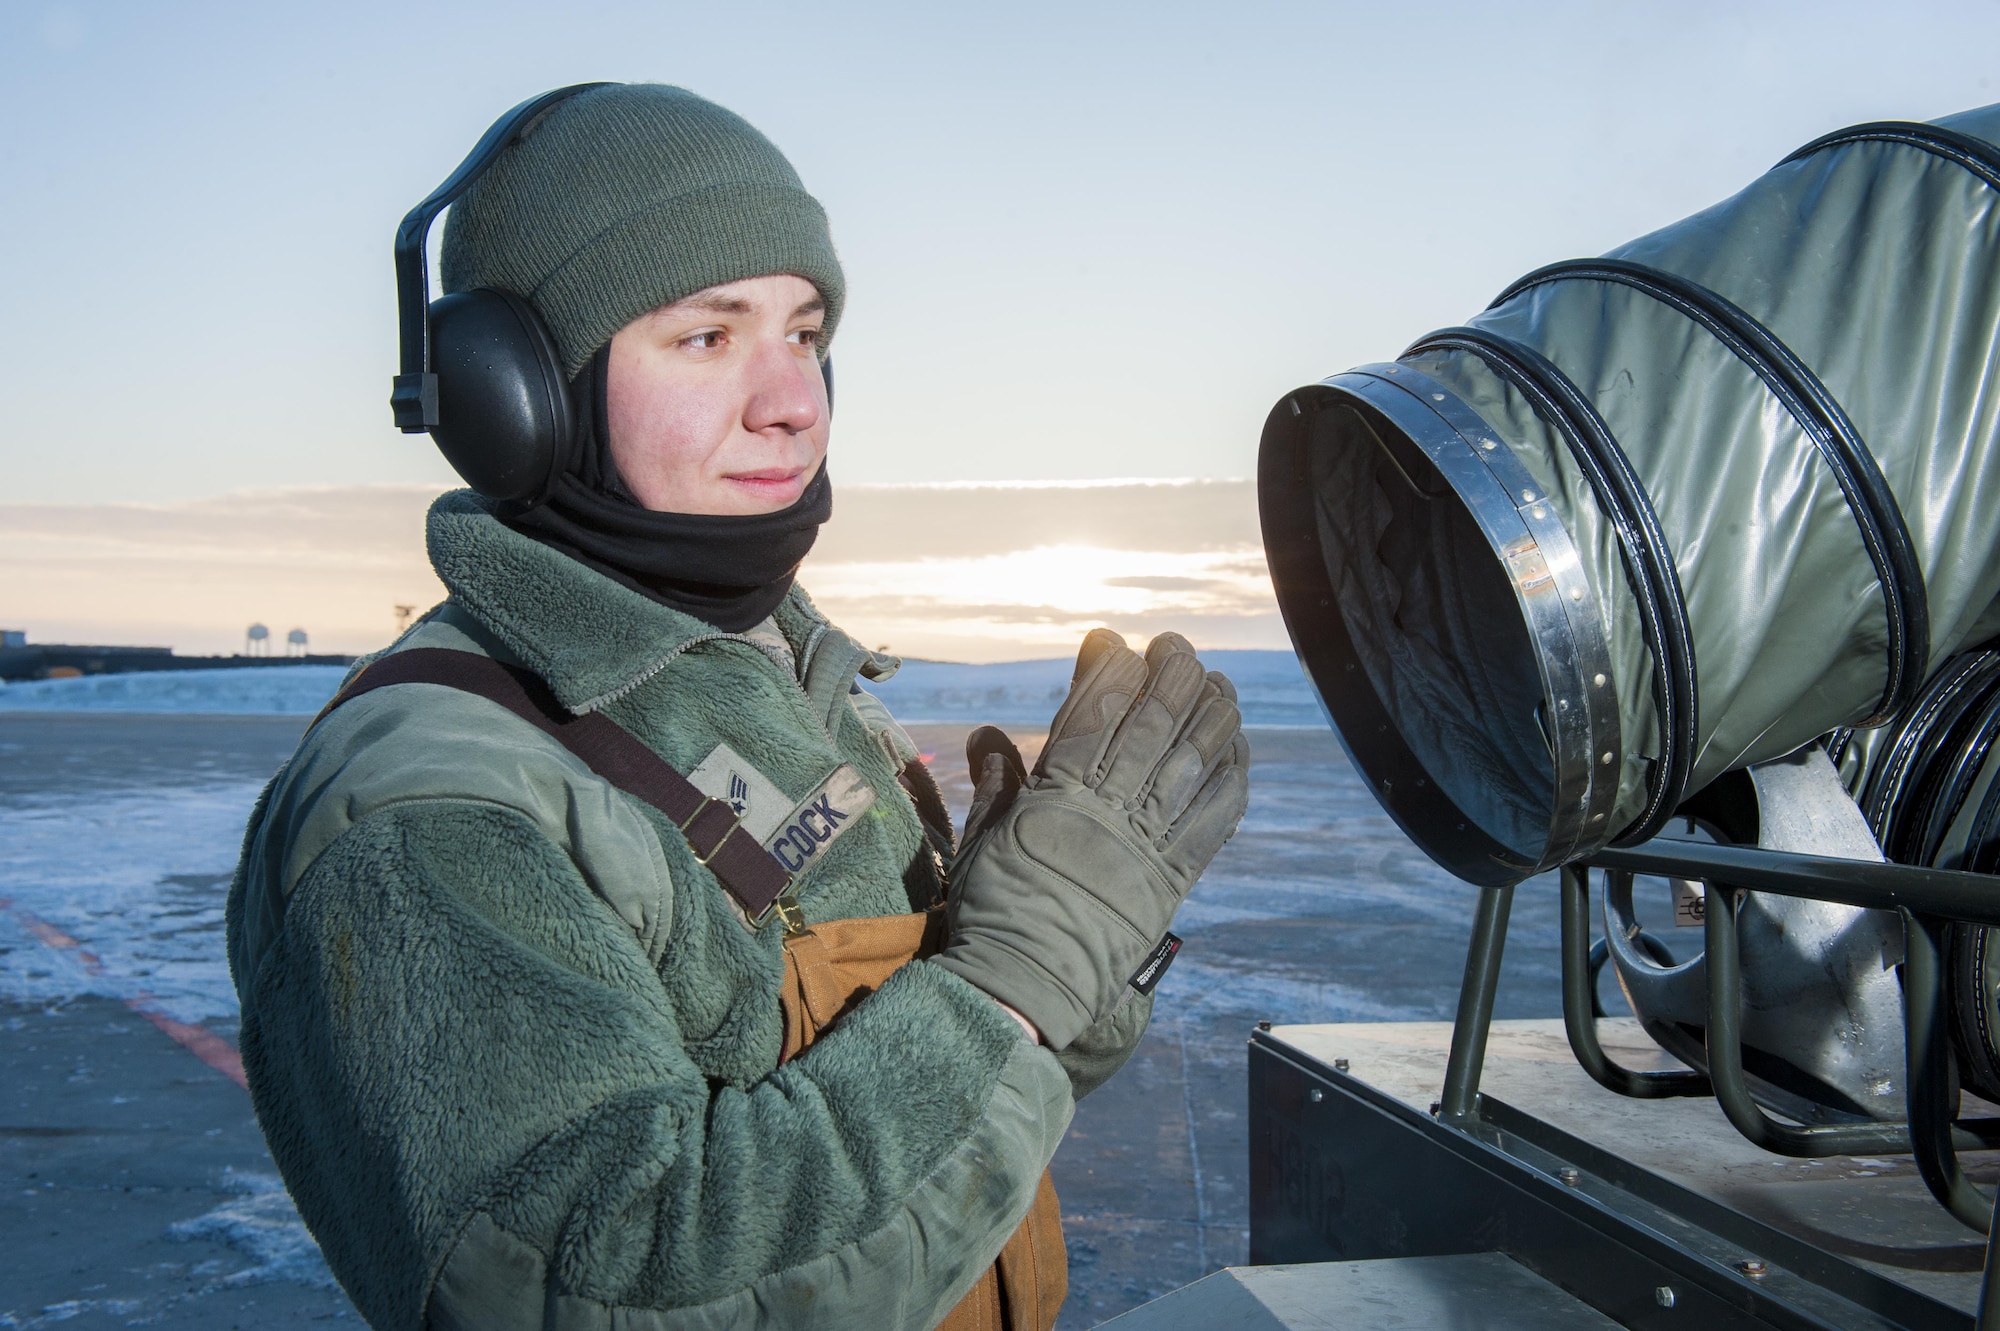 Senior Airman Daniel Hancock, 5th Aircraft Maintenance Squadron crew chief, warms his hands on the flightline at Minot Air Force Base, N.D., Jan. 26, 2017. Hancock, along with other 5th AMXS Airmen, work in harsh weather conditions to provide B-52 firepower on demand. (U.S. Air Force photo/Senior Airman J.T. Armstrong)